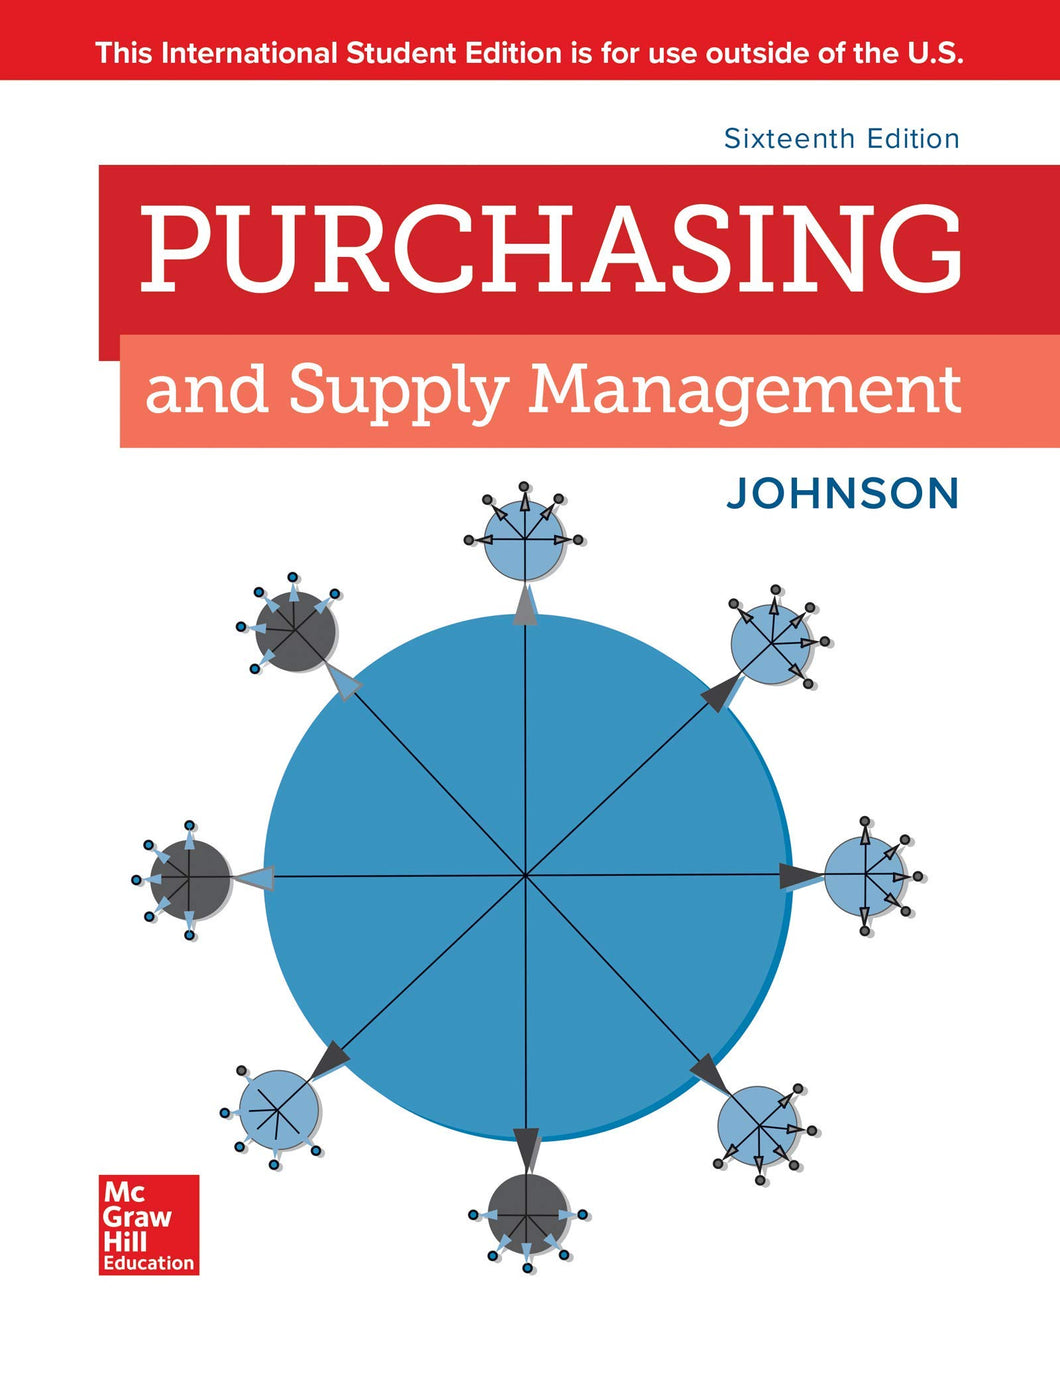 Purchasing and Supply Management [Paperback] 16e by Johnson - Smiling Bookstore